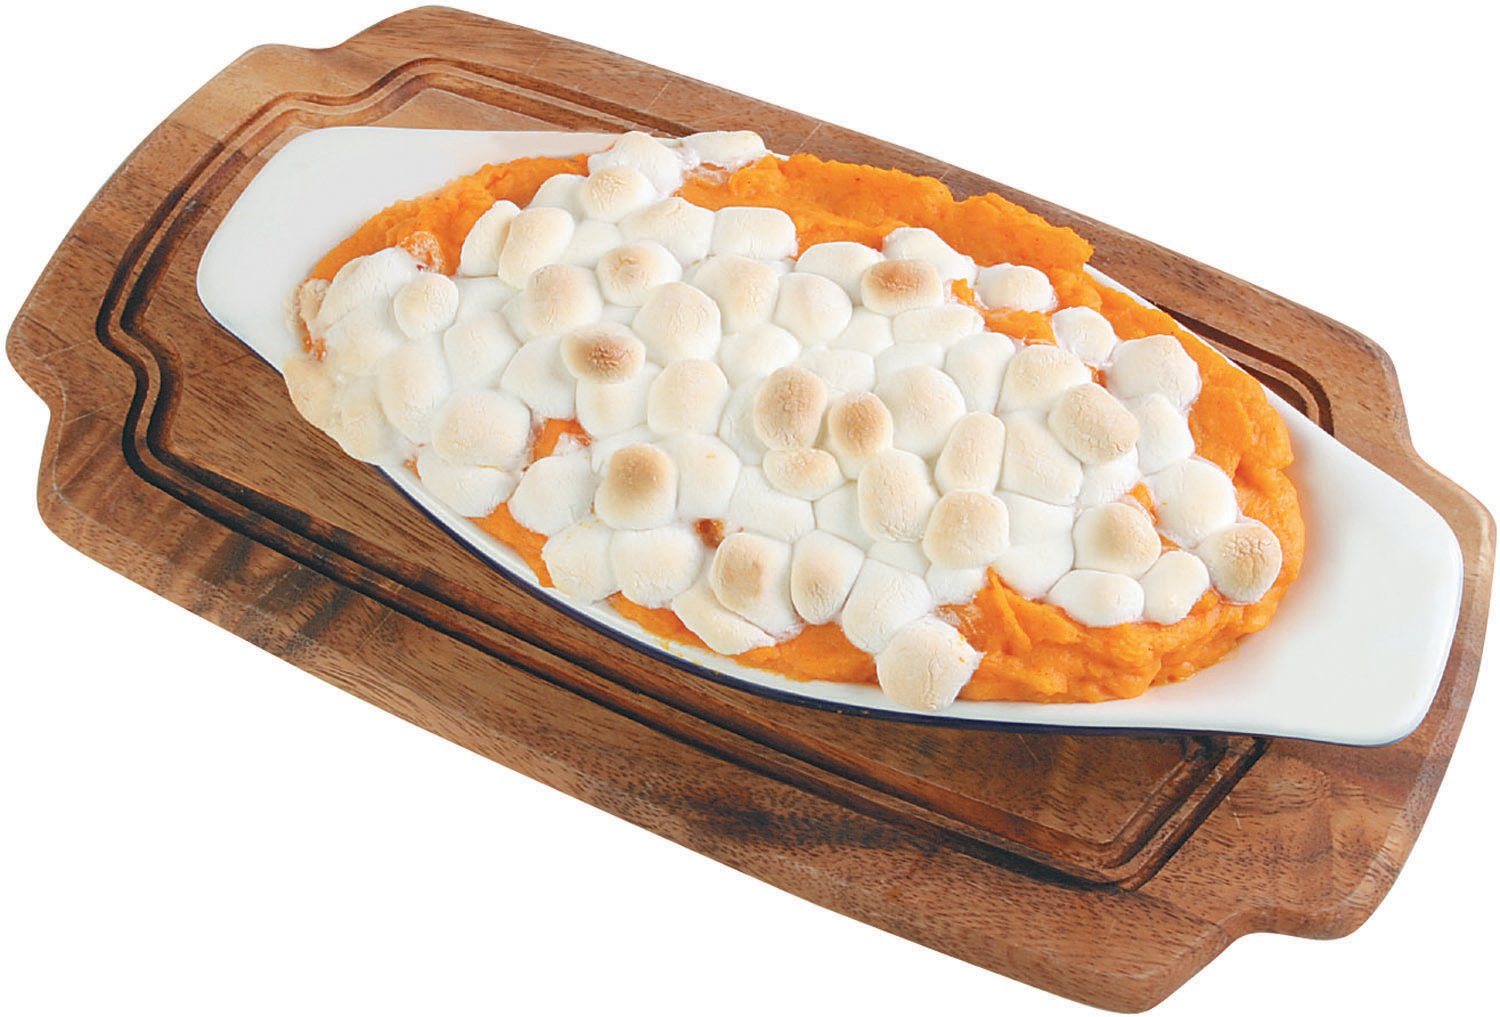 Cooked Sweet Potatoes in Dish on Cutting Board Food Picture